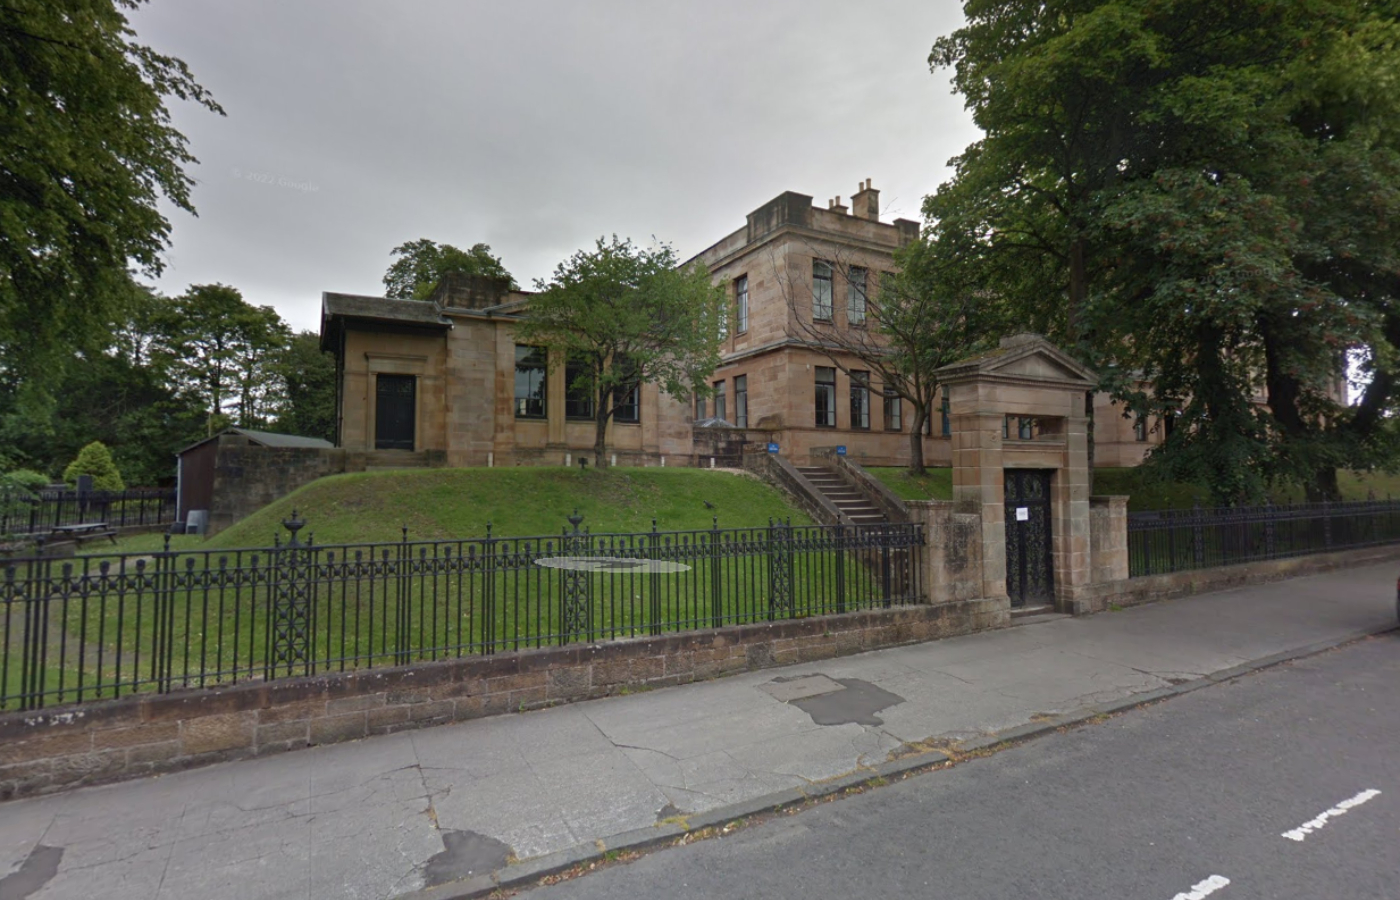 Kelvinside Academy say they are proud of the alumni for his achievements. Photo: Google Maps.